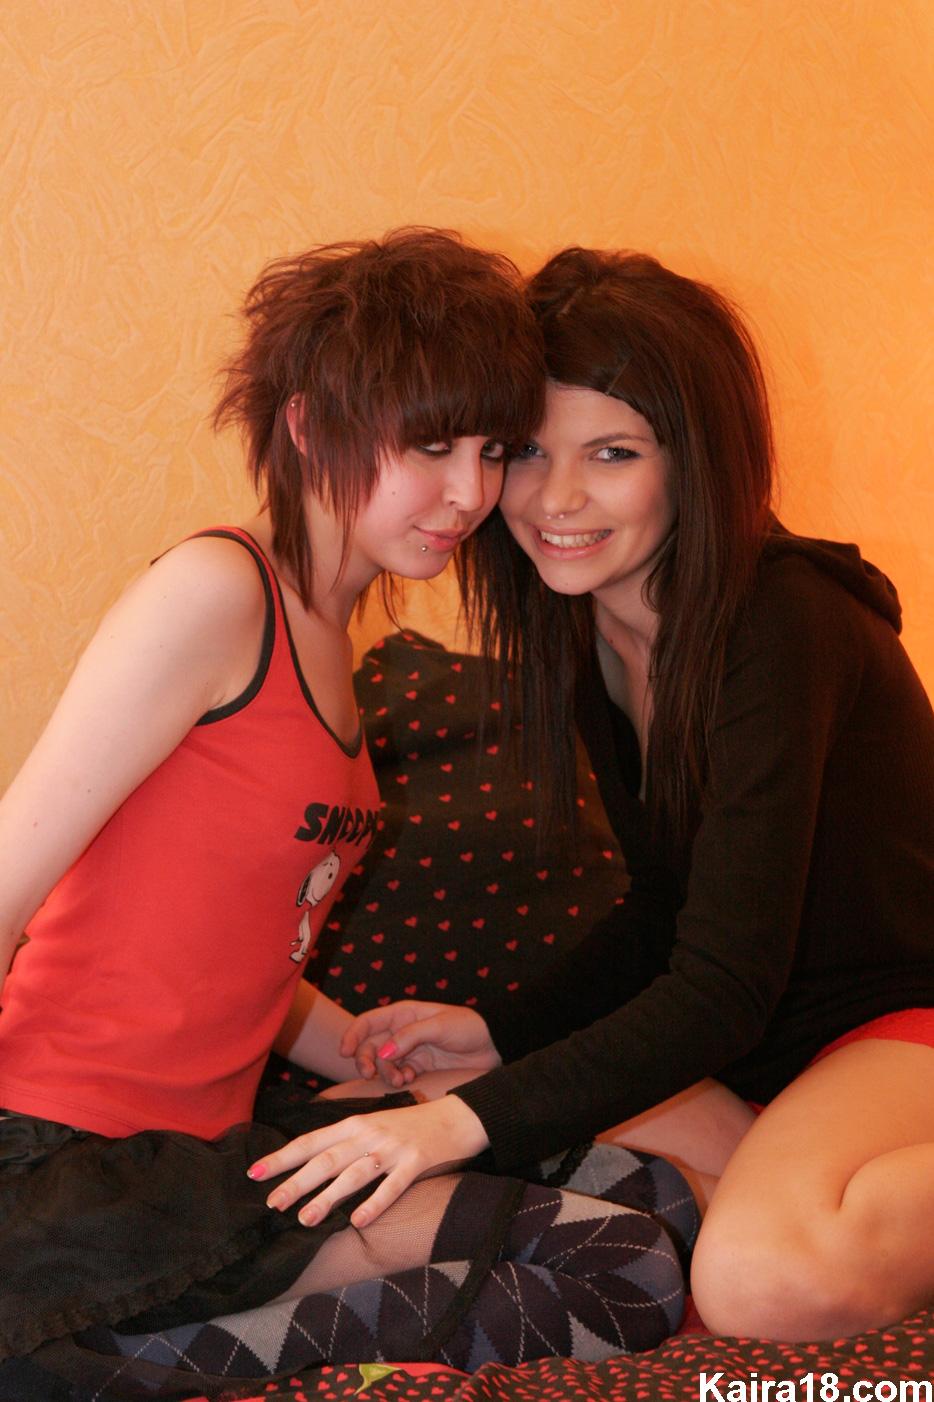 Pictures of teen Kaira 18 getting cosy with her girlfriend #55898540